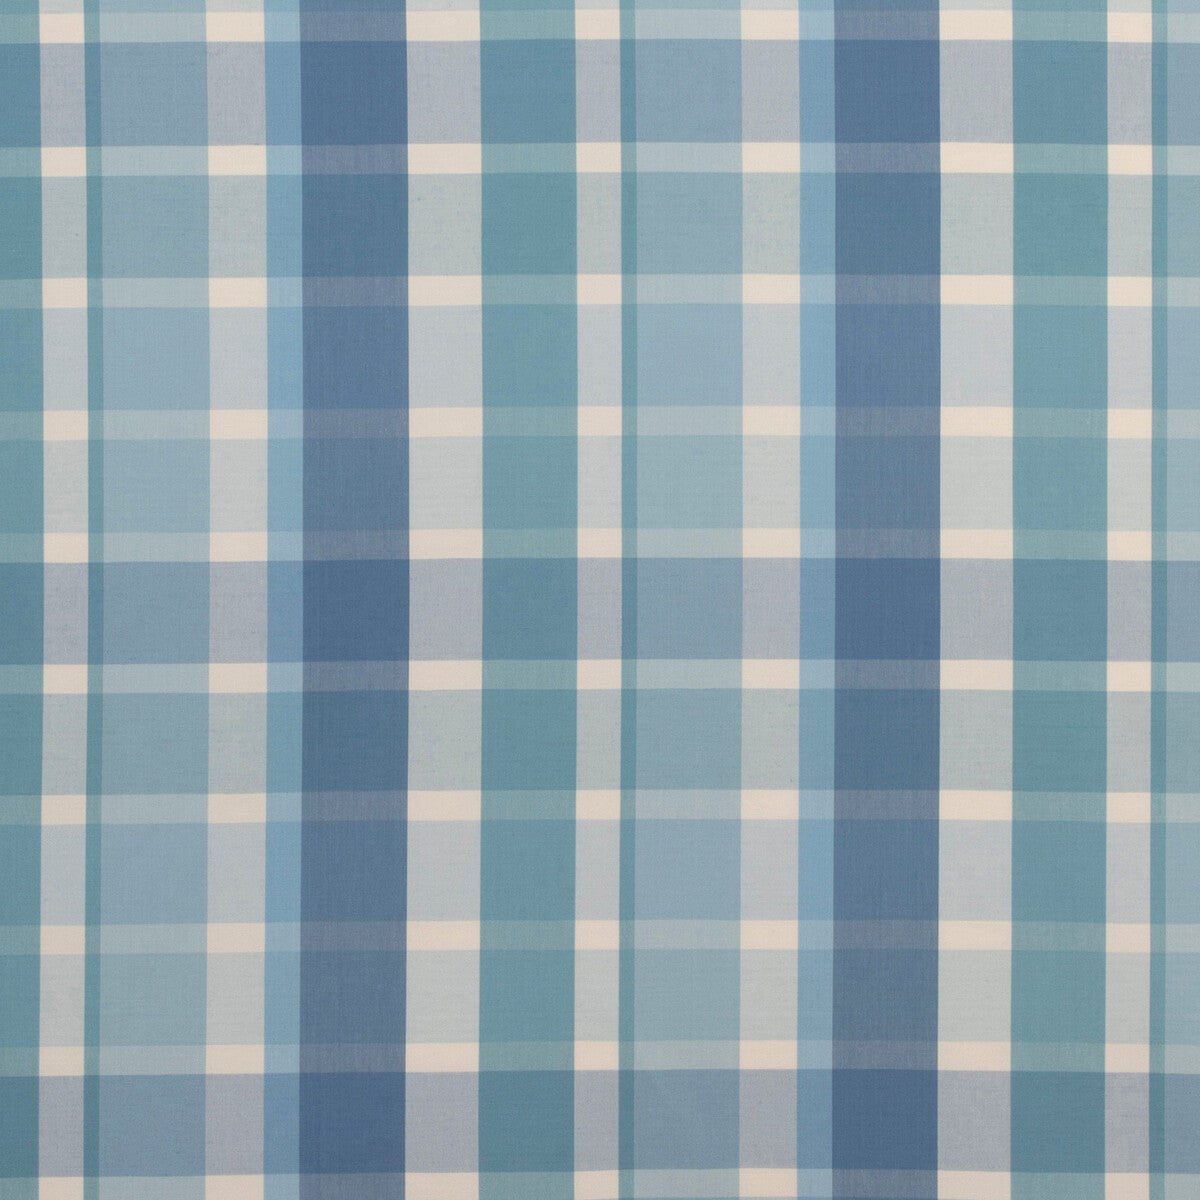 Fisher Plaid fabric in capri/sky color - pattern 2023107.55.0 - by Lee Jofa in the Highfield Stripes And Plaids collection